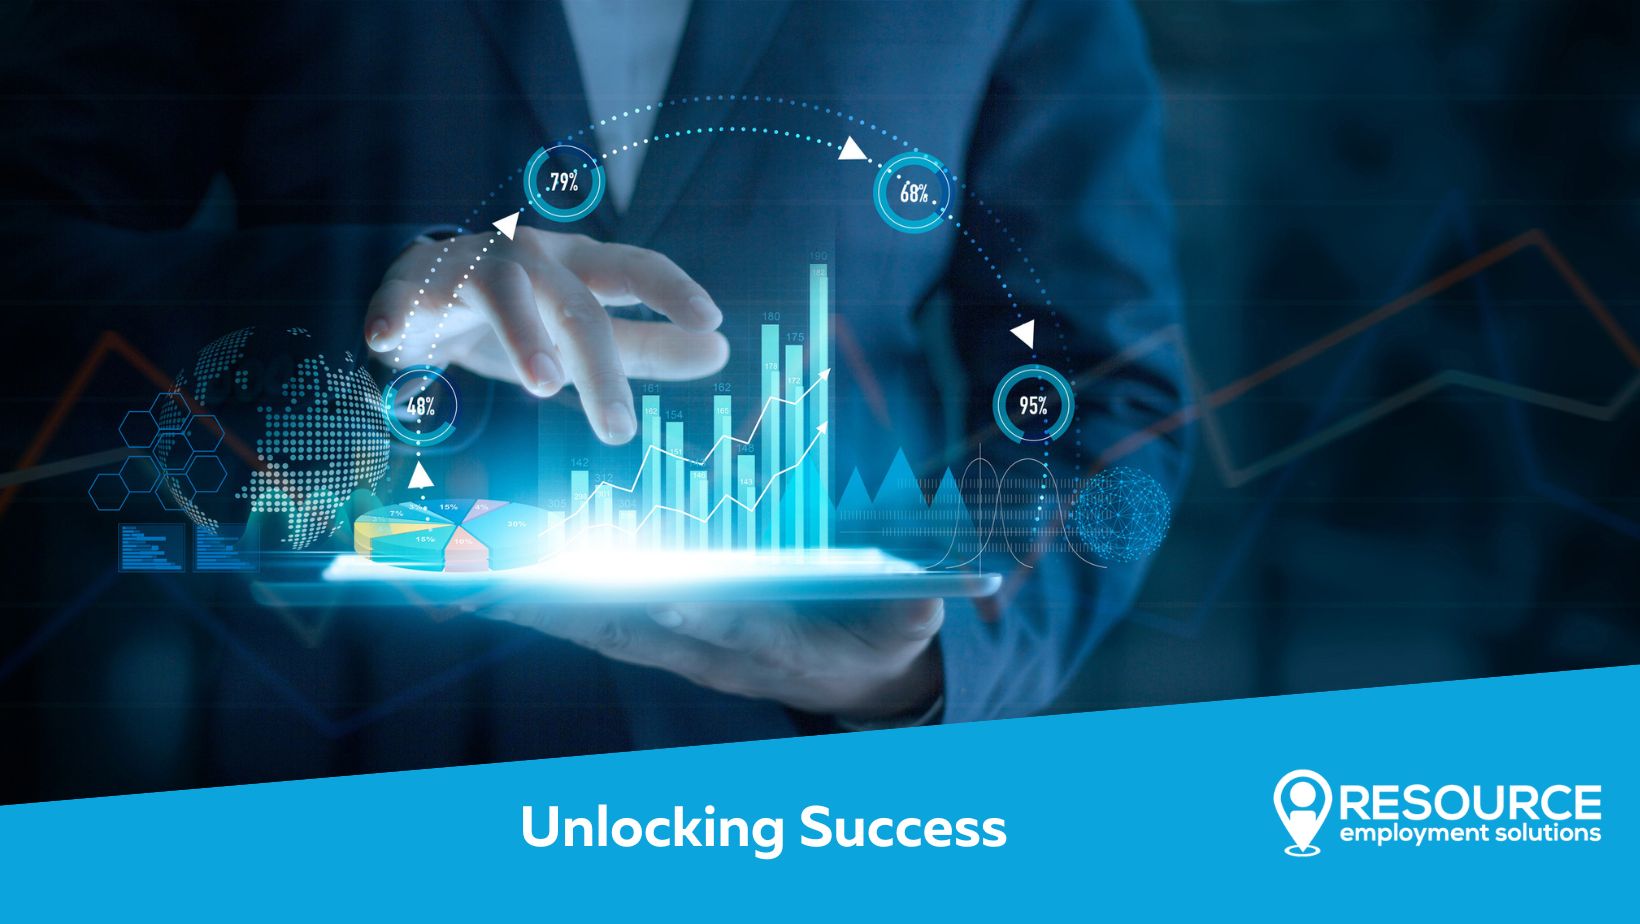 Unlocking Success: Optimizing Private Equity Investments with Resource Employment Solutions